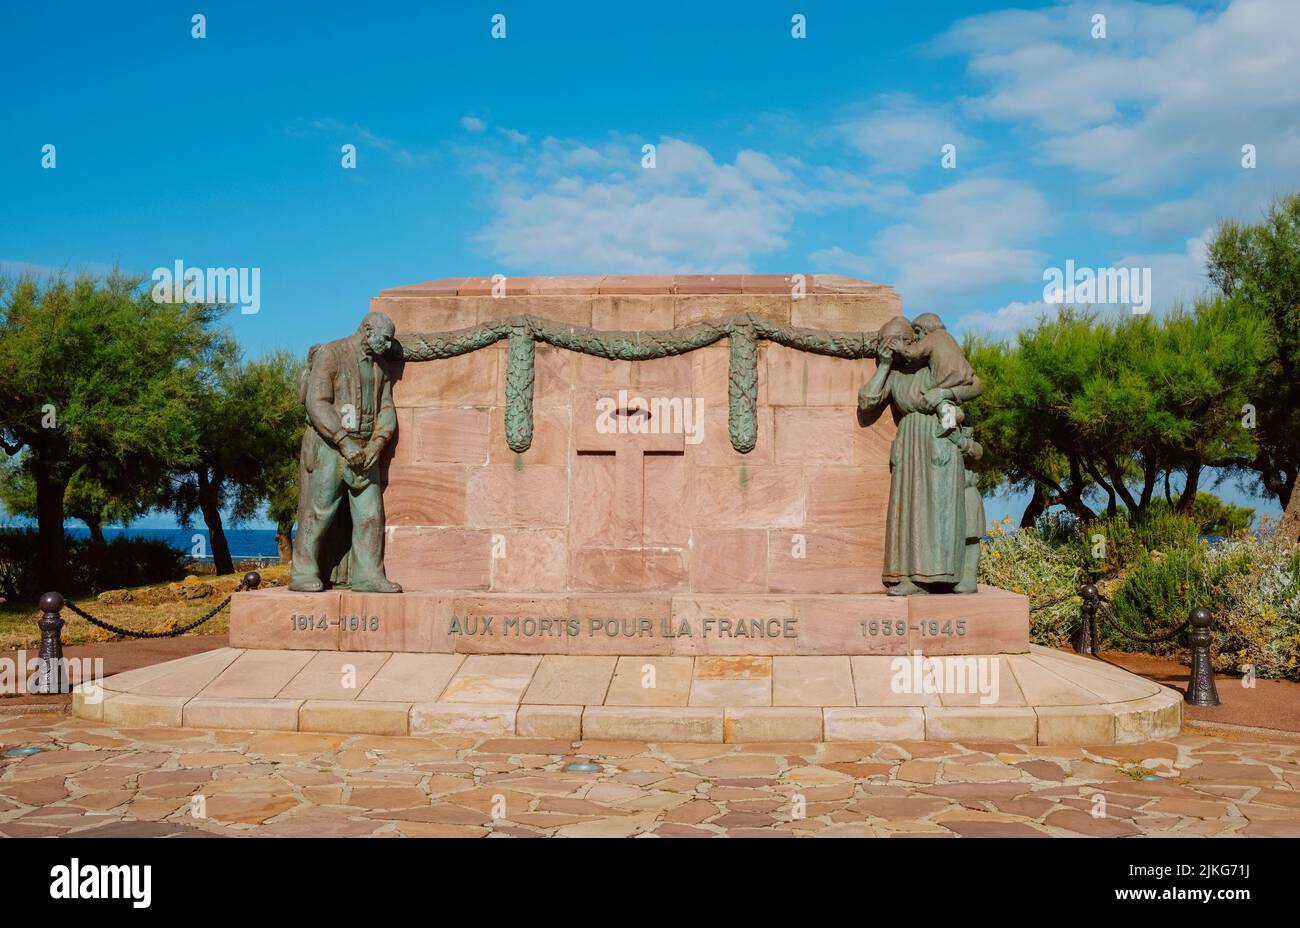 Biarritz, France - June 24, 2022: A view of the Monument to the Dead People for France, in the Esplanade du Port Vieux in Biarritz, France, in honor o Stock Photo